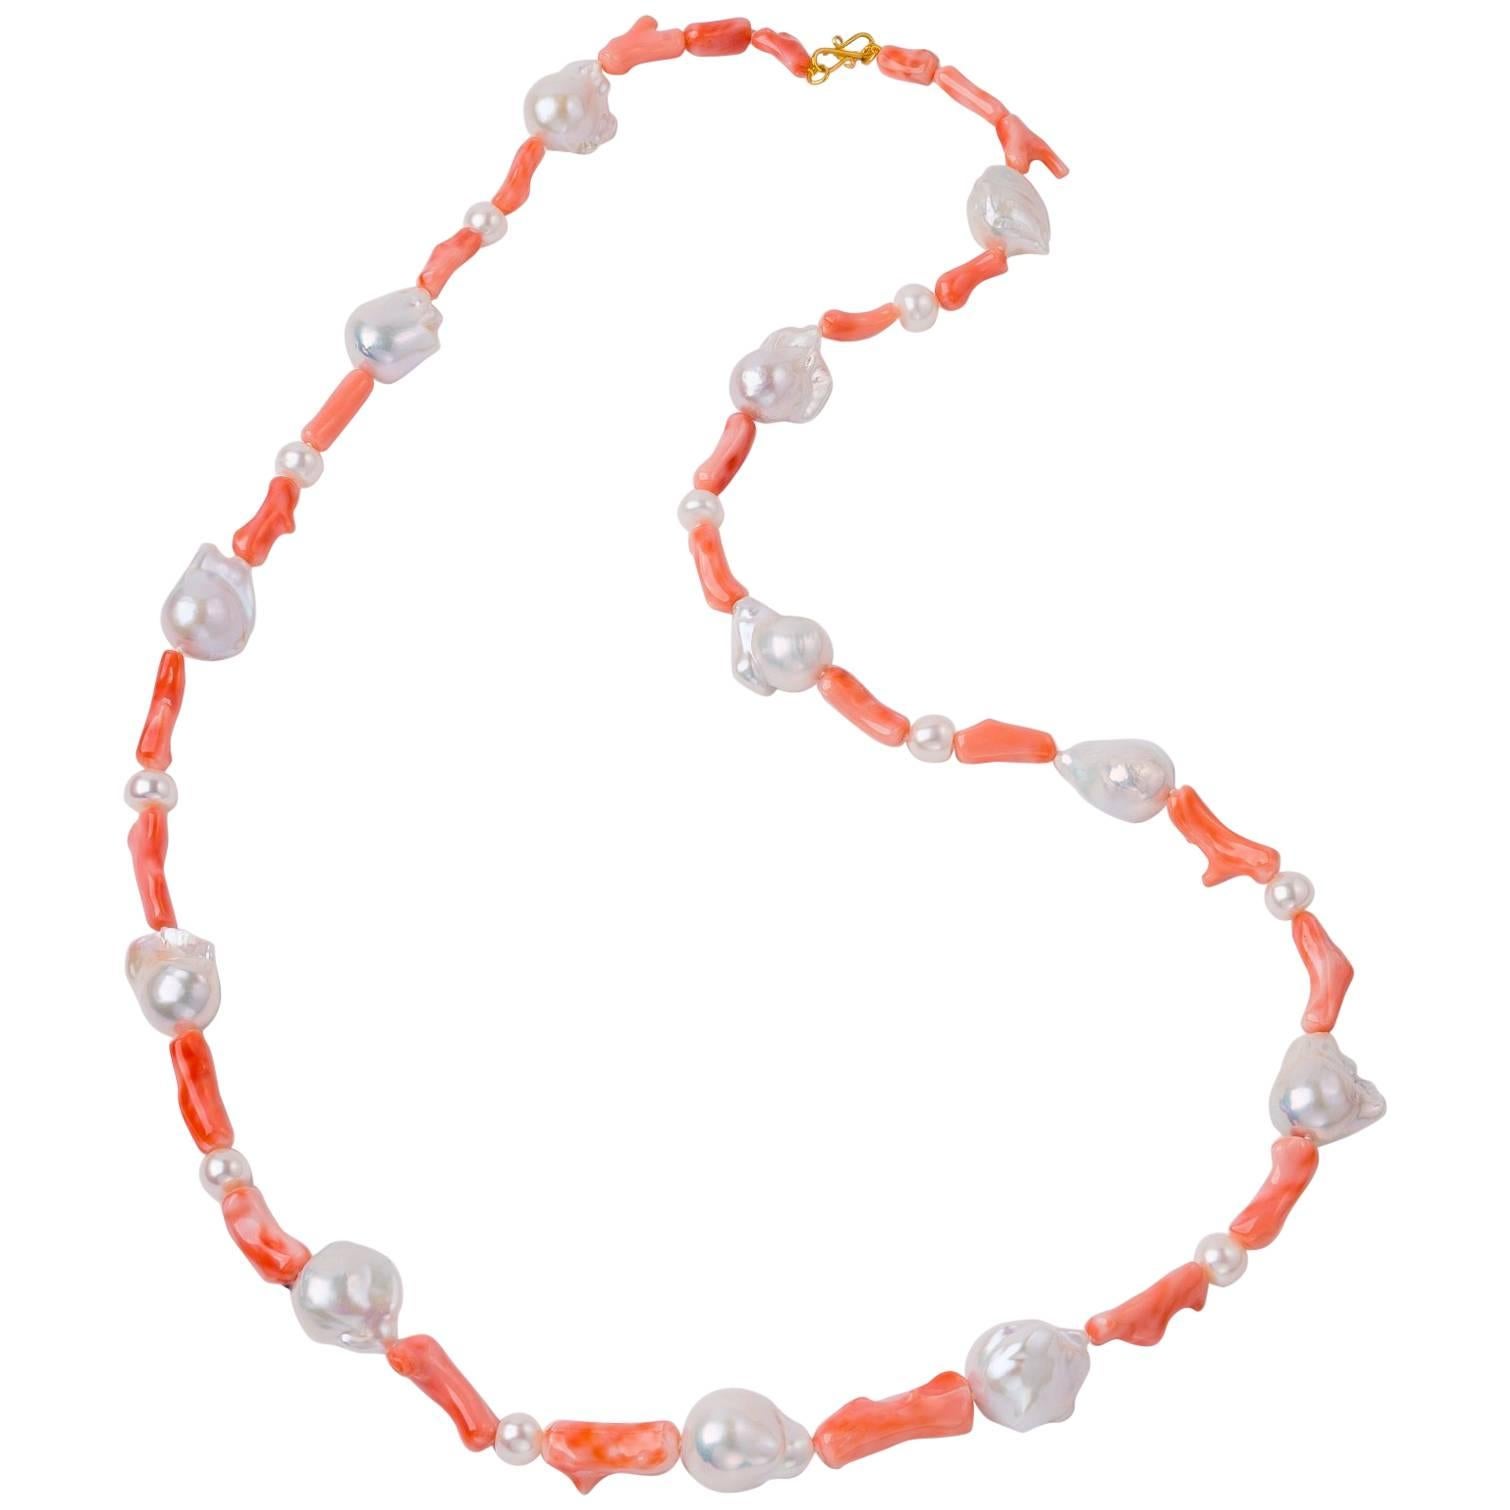 Angel Skin Deep Sea Coral Baroque Freshwater Pearls Necklace